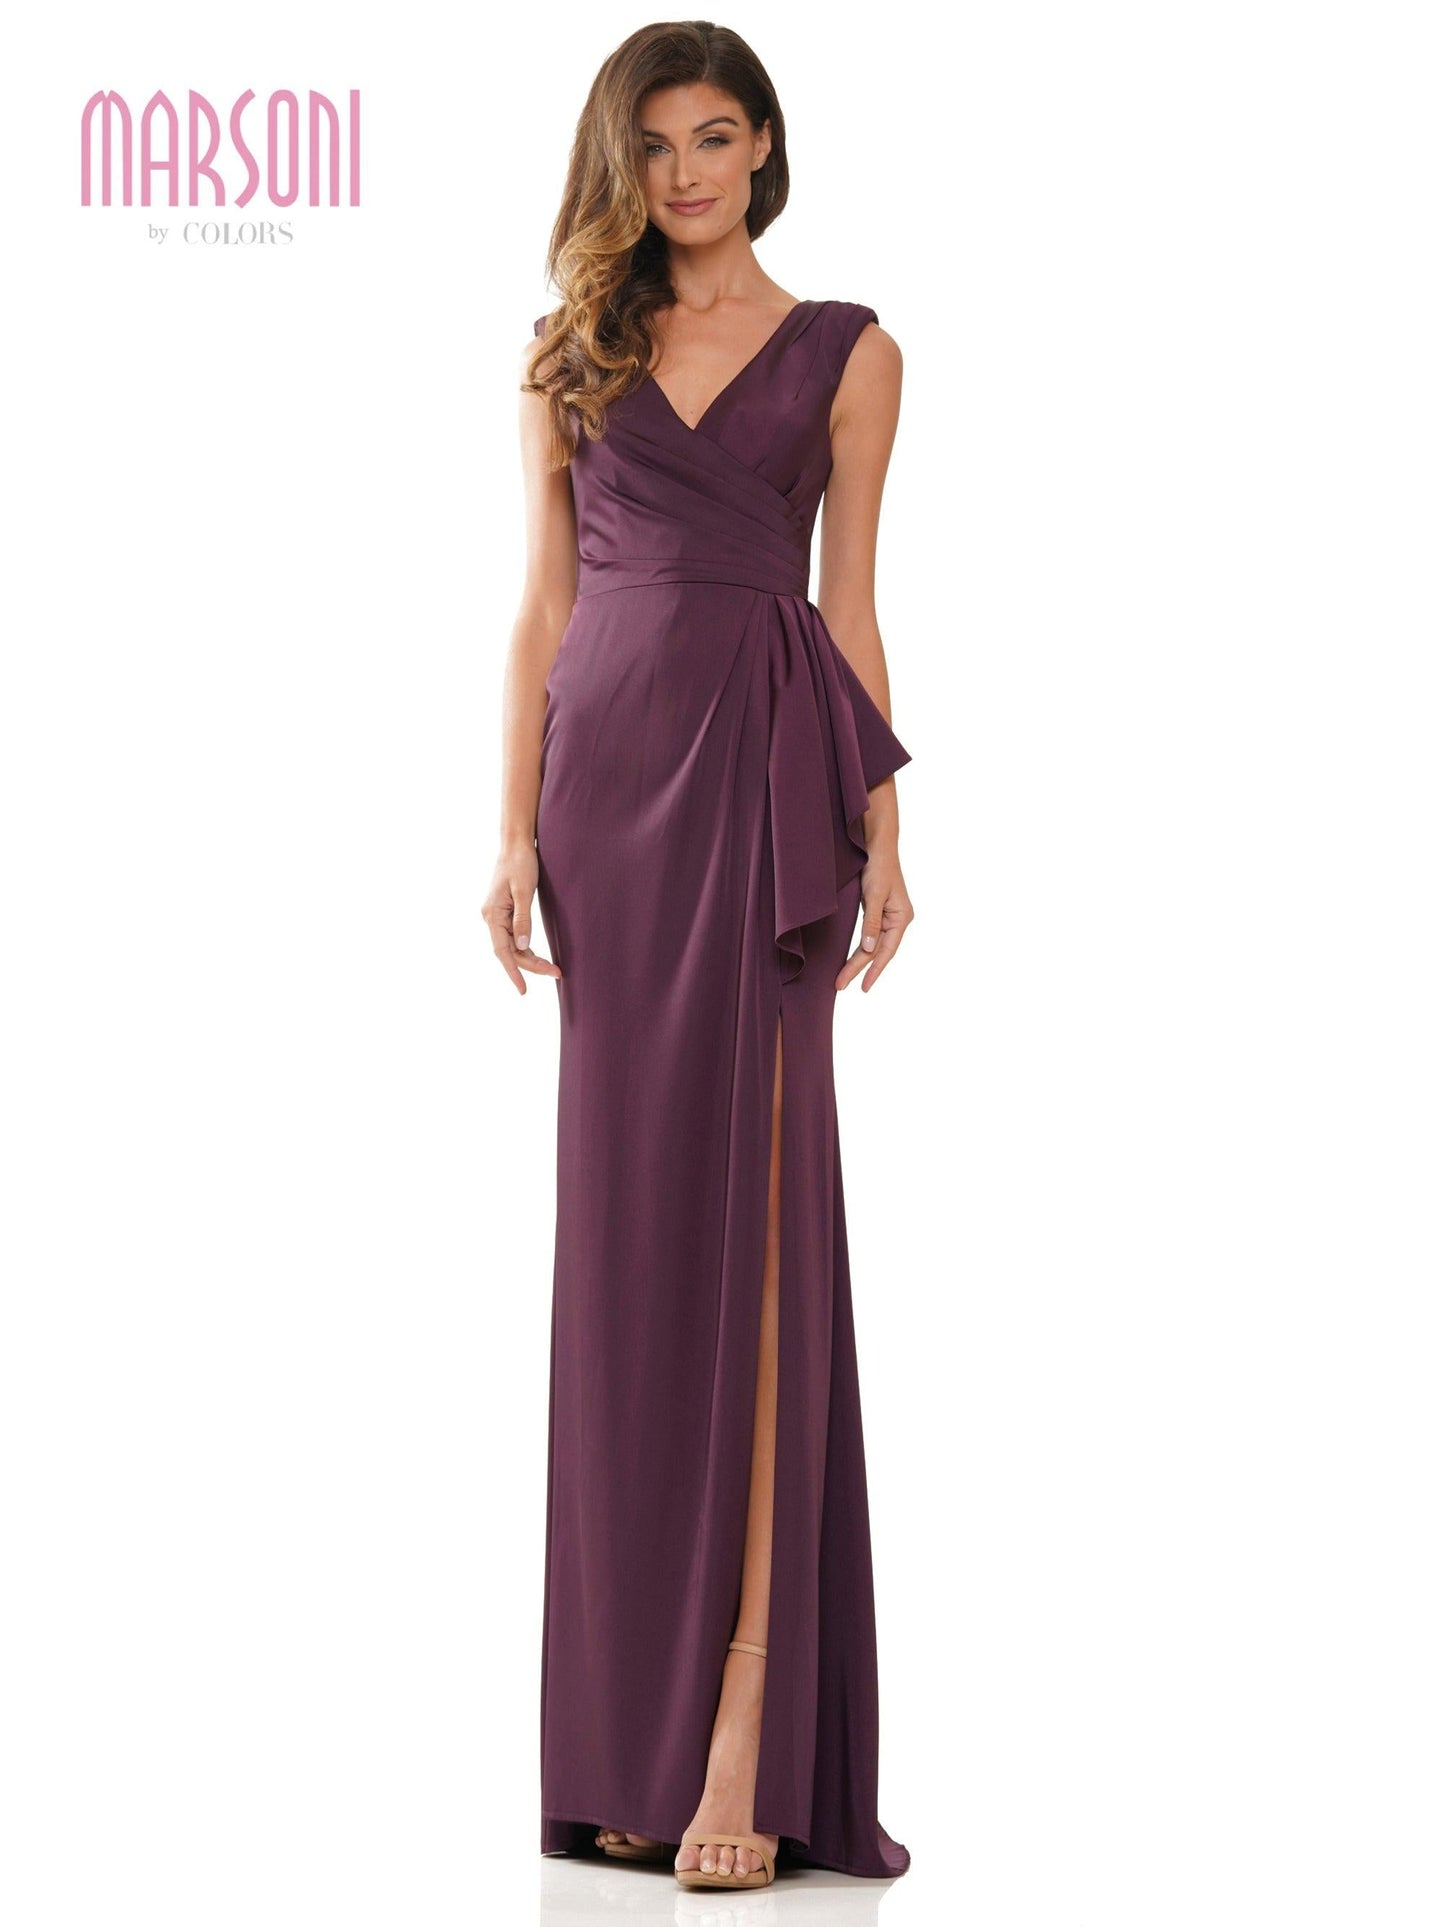 Marsoni Long Formal Mother of the Bride Gown 1227 - The Dress Outlet